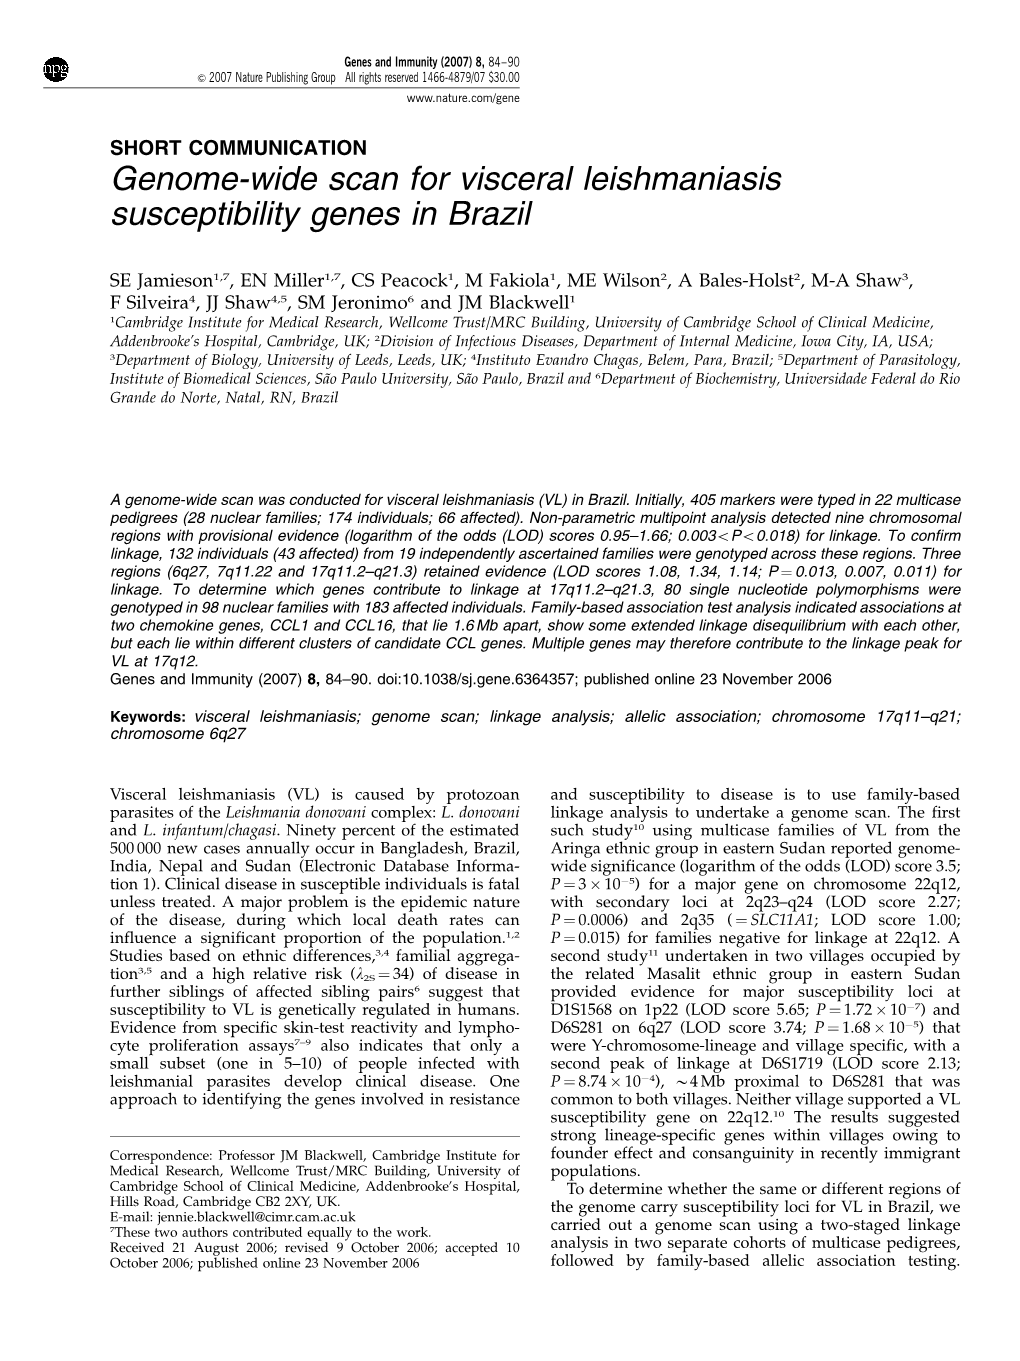 Genome-Wide Scan for Visceral Leishmaniasis Susceptibility Genes in Brazil